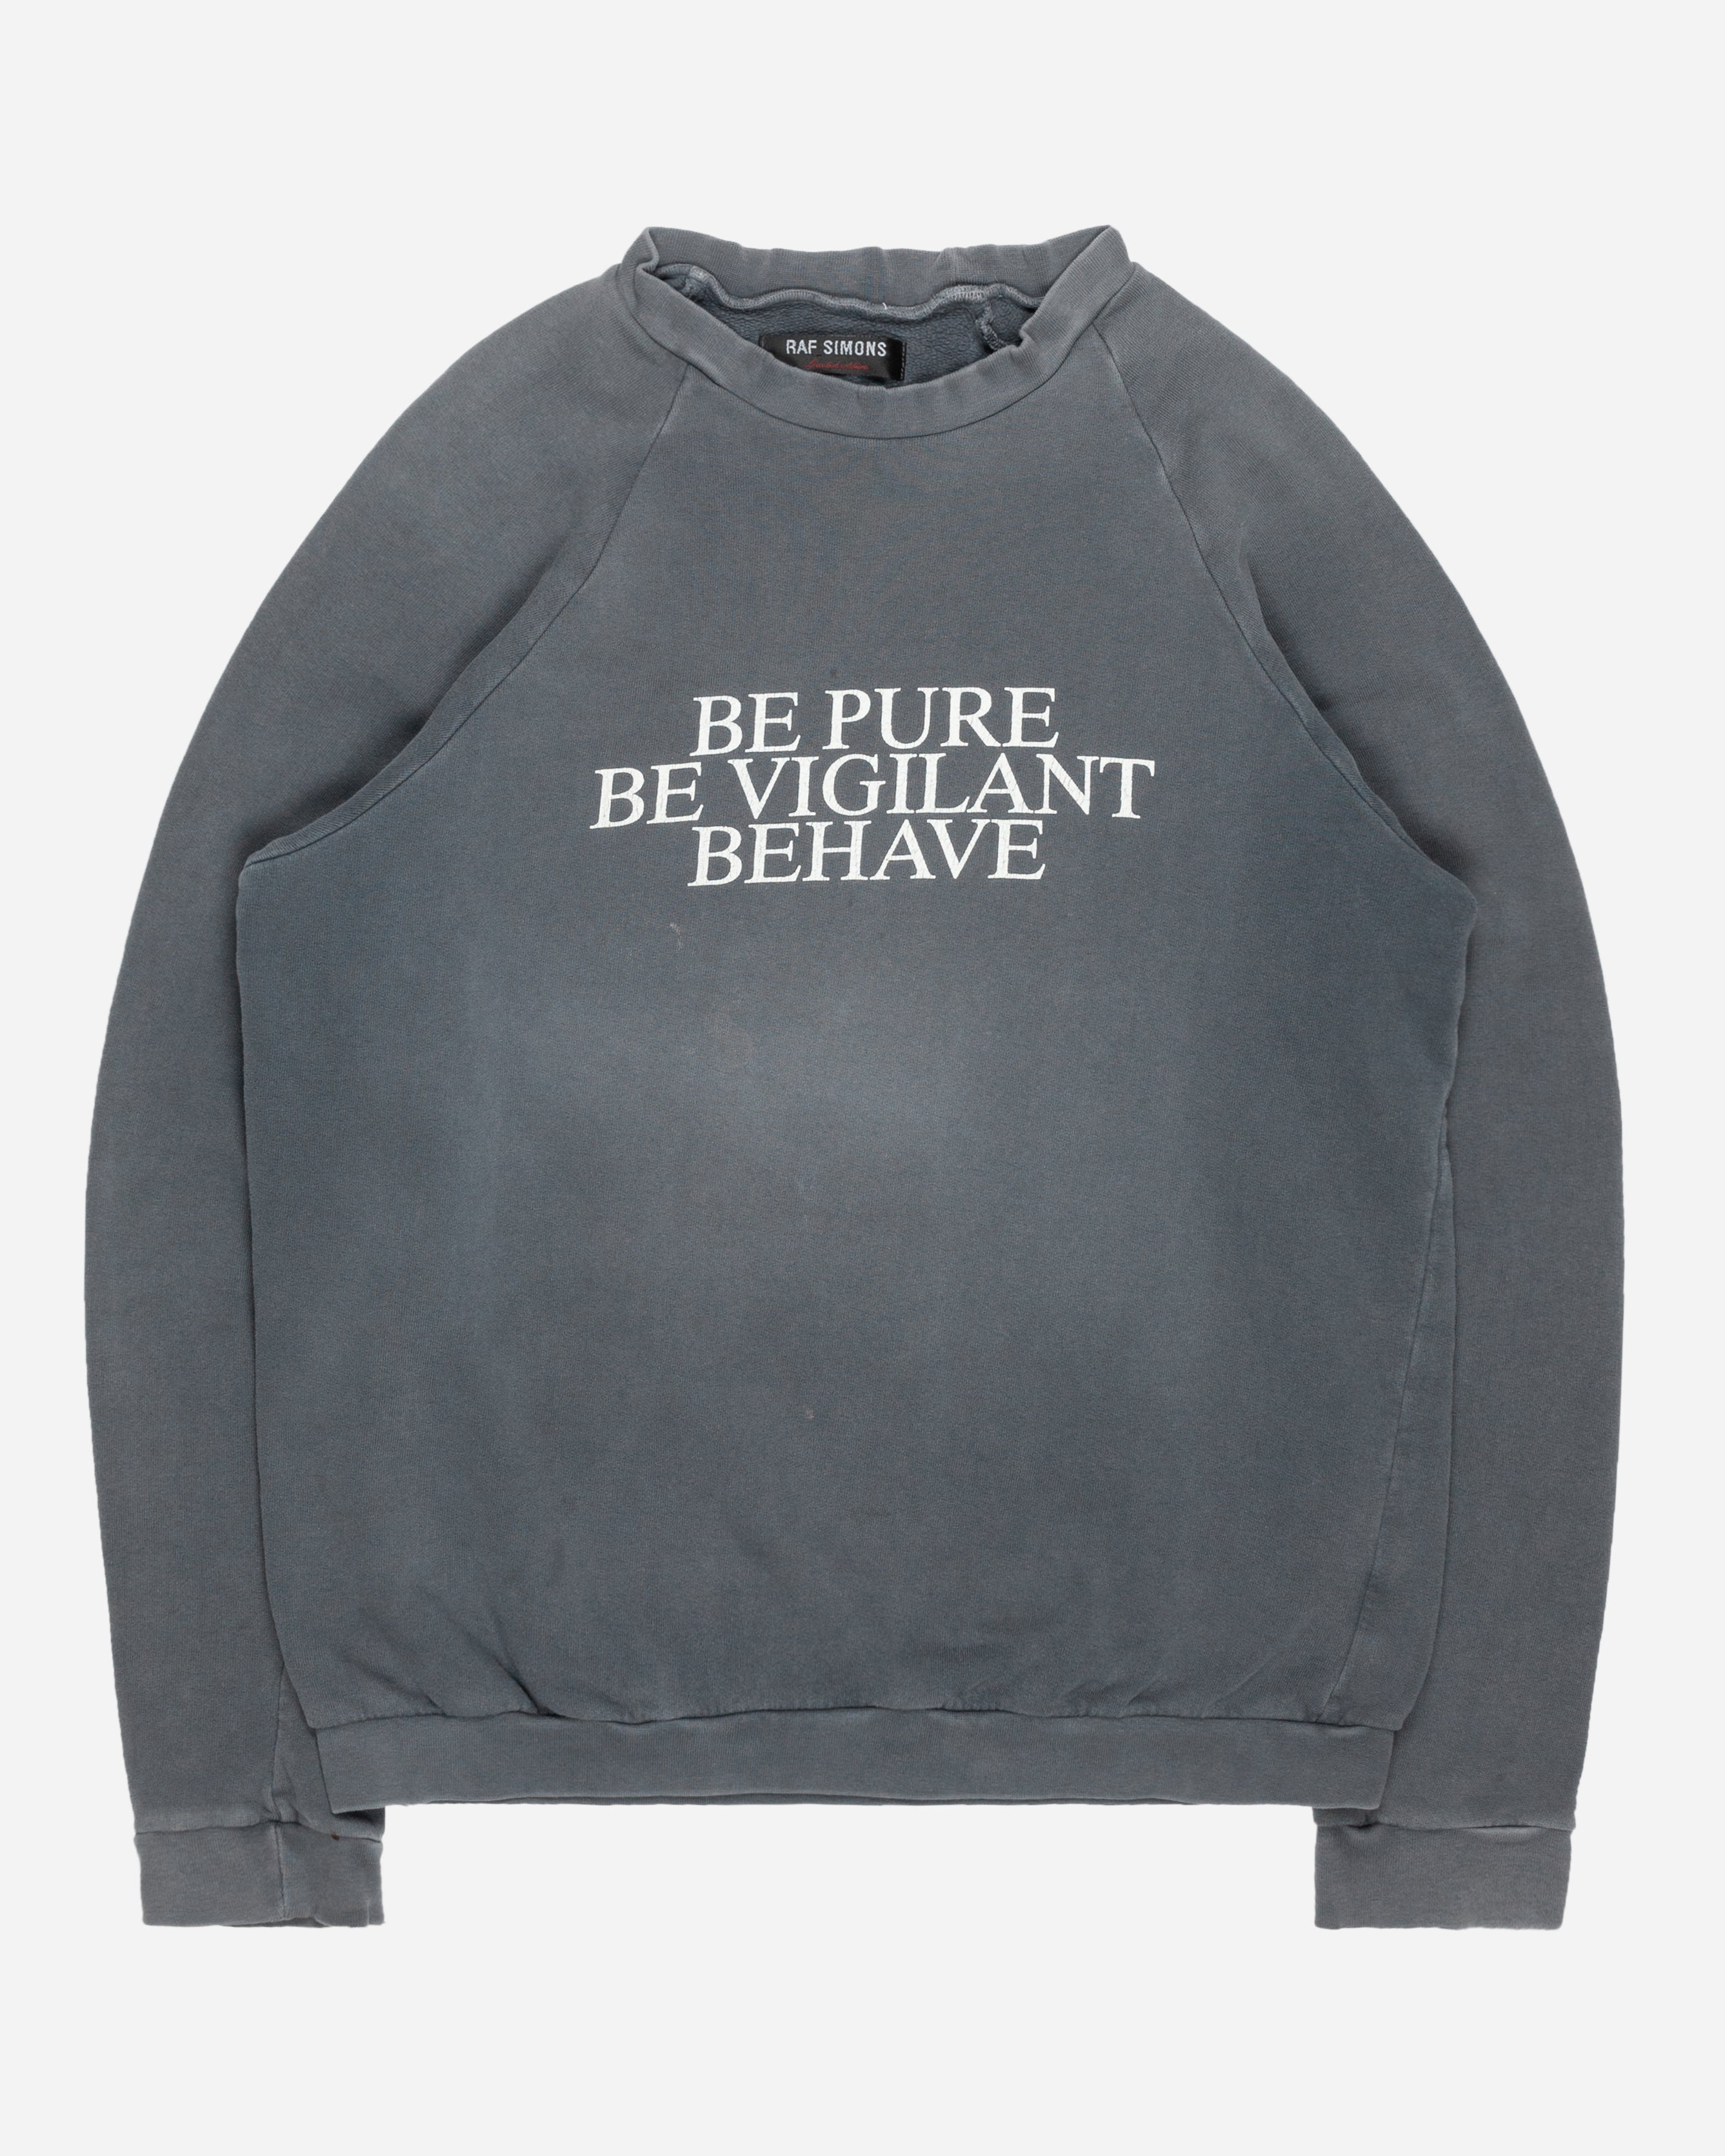 Raf Simons “Be Pure Be Vigilant Behave” Crewneck Sweatshirt - SS02 “Woe On  Those Who Spit On The Fear Generation…”